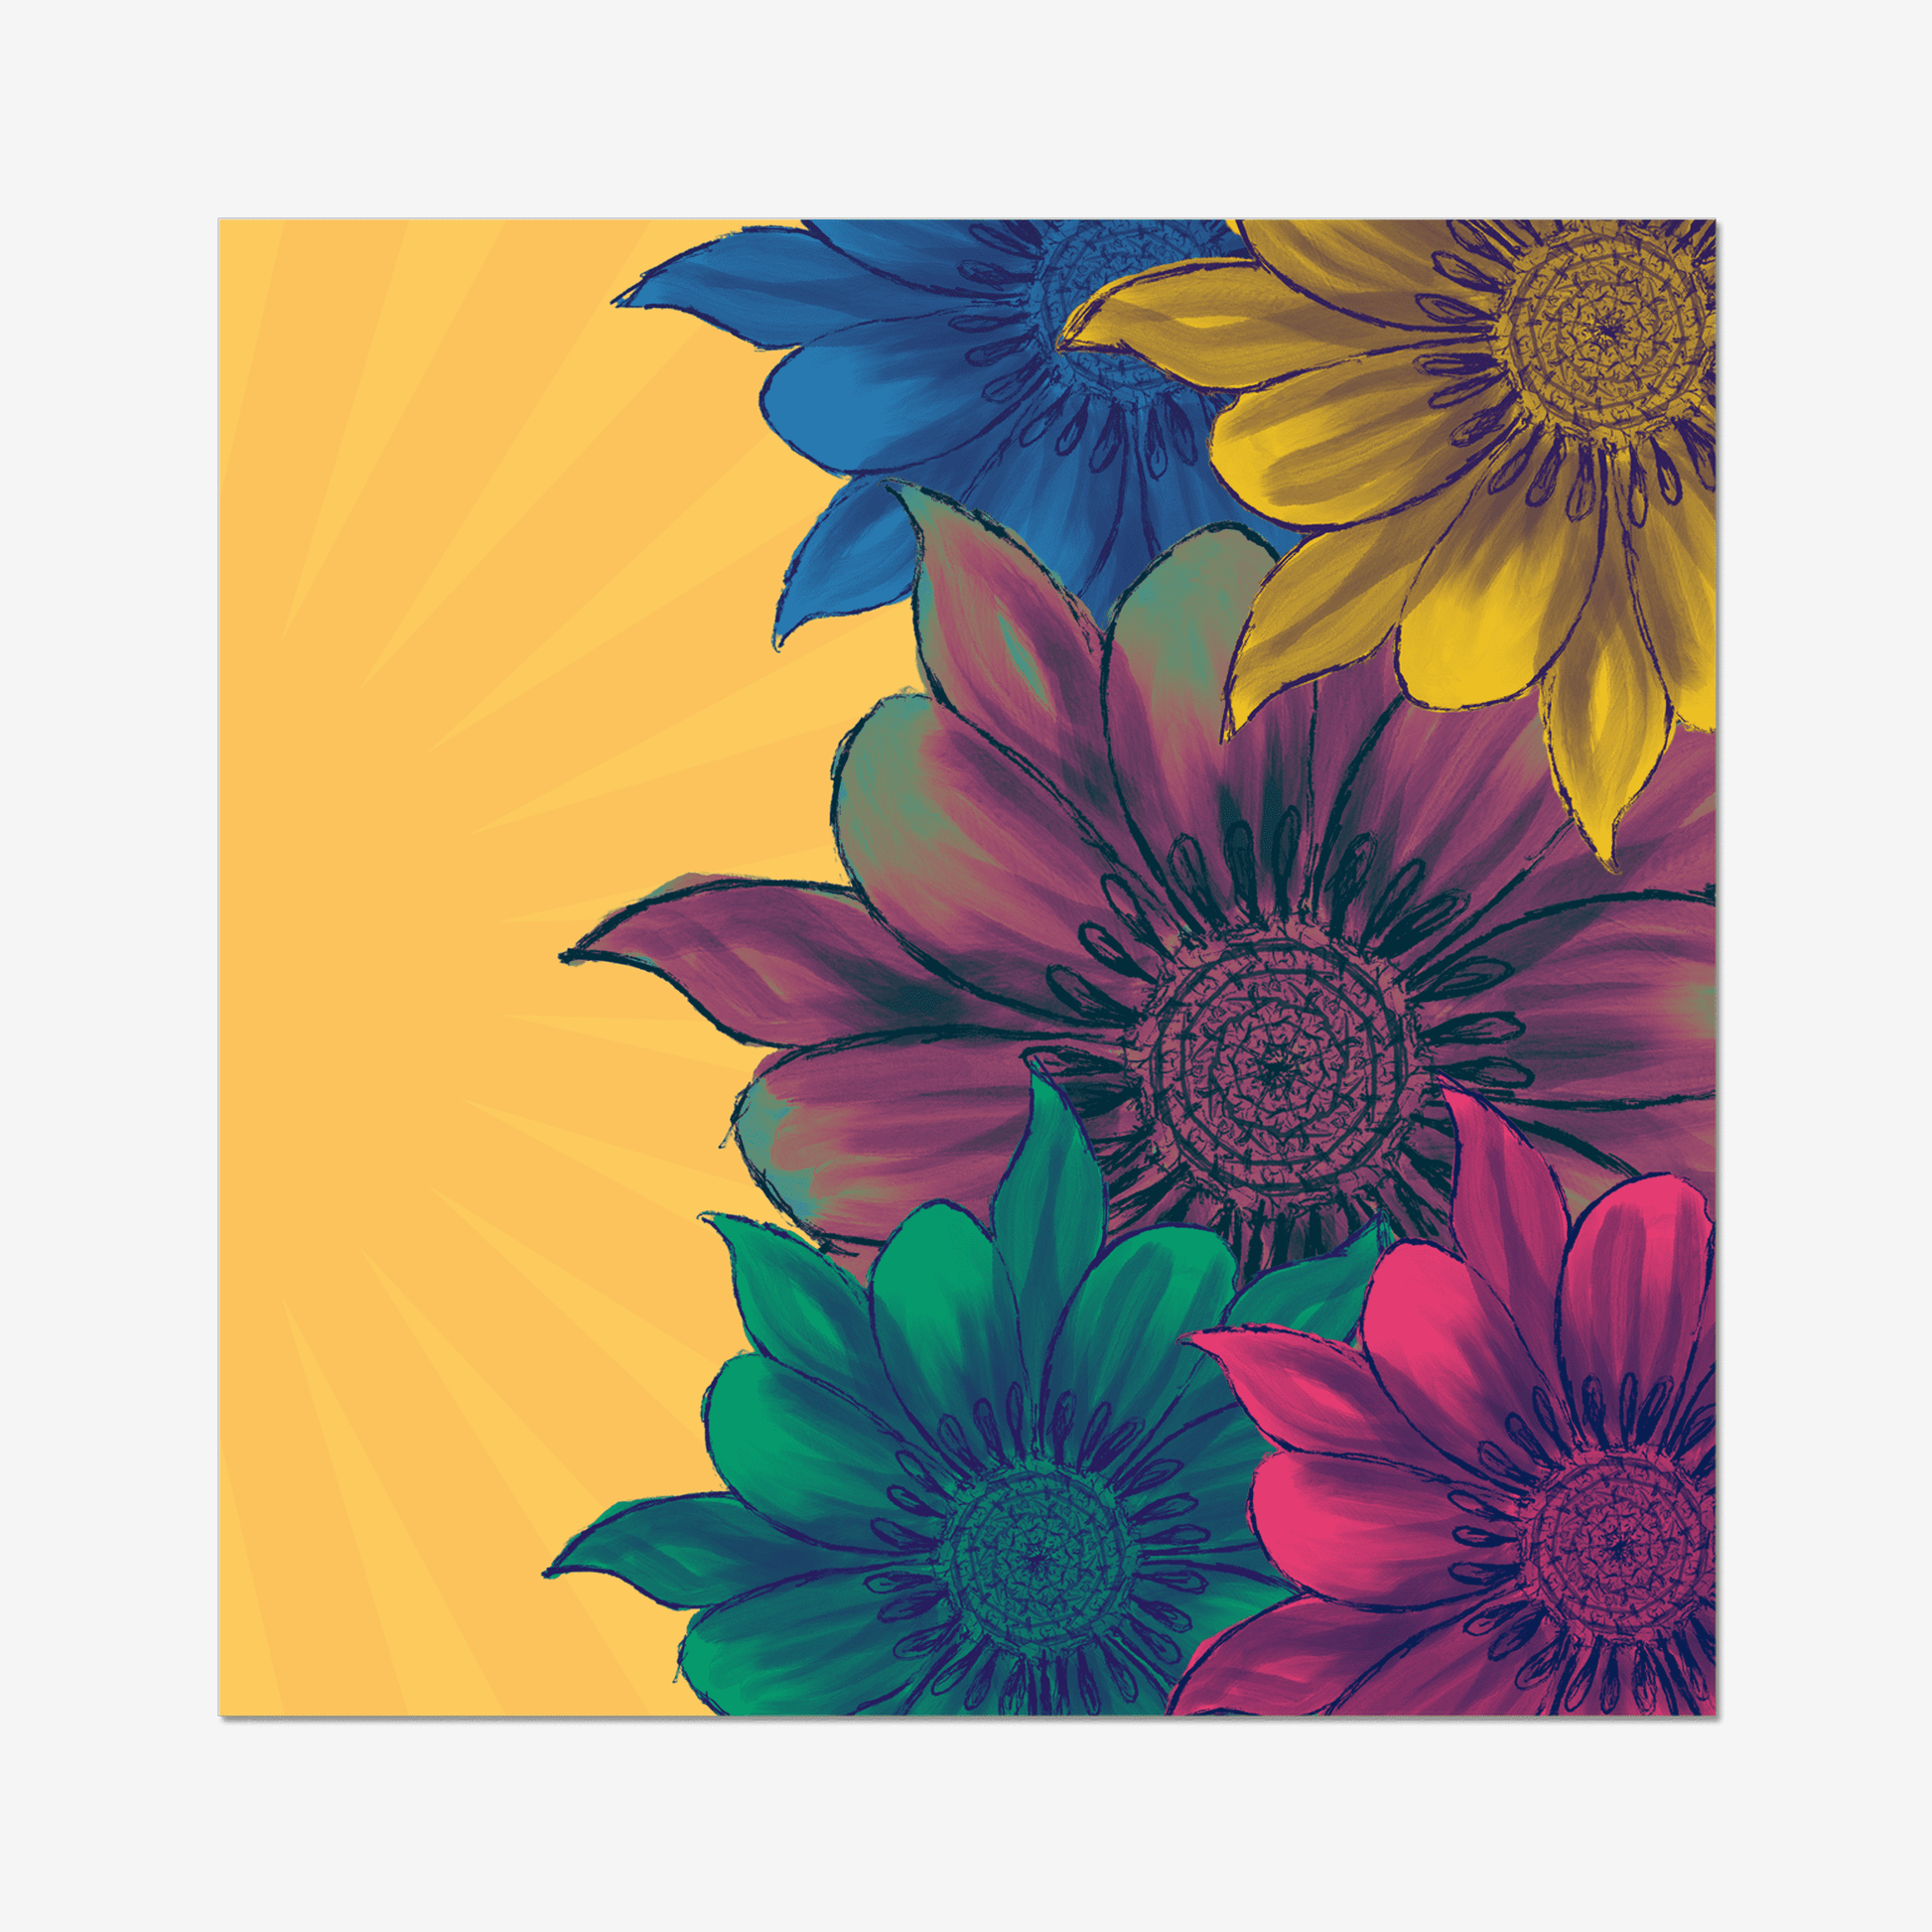 A bright and trippy, sunbeams and flowers print.  This quirky art print is sure to add some eclectic vibes to your walls. The colourful blue, green, yellow and purple flowers in really pop against the sunbeam background. And the paint effect of the flowers is truly stunning. 